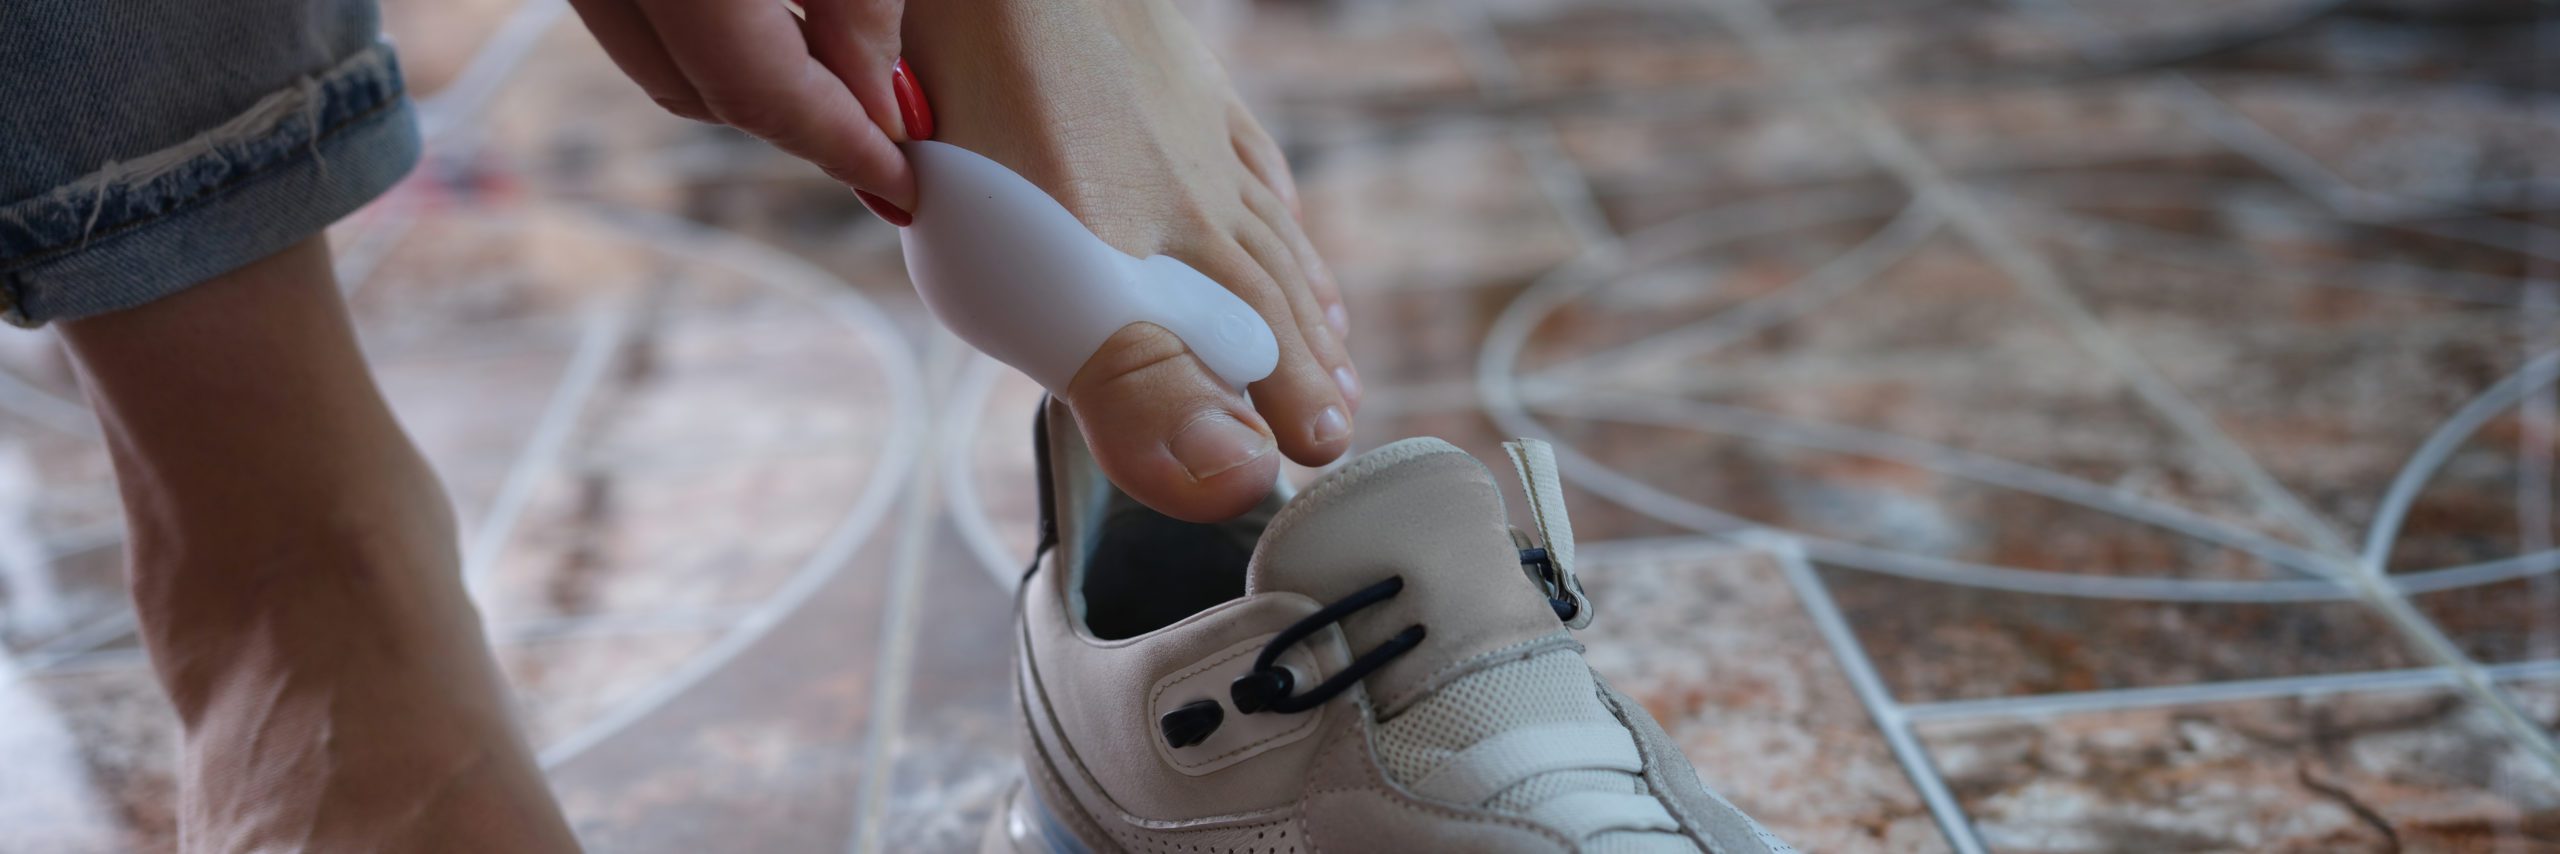 A woman is putting on a shoe that has a bunion pad inserted in it to help alleviate pain and pressure on the bunion.